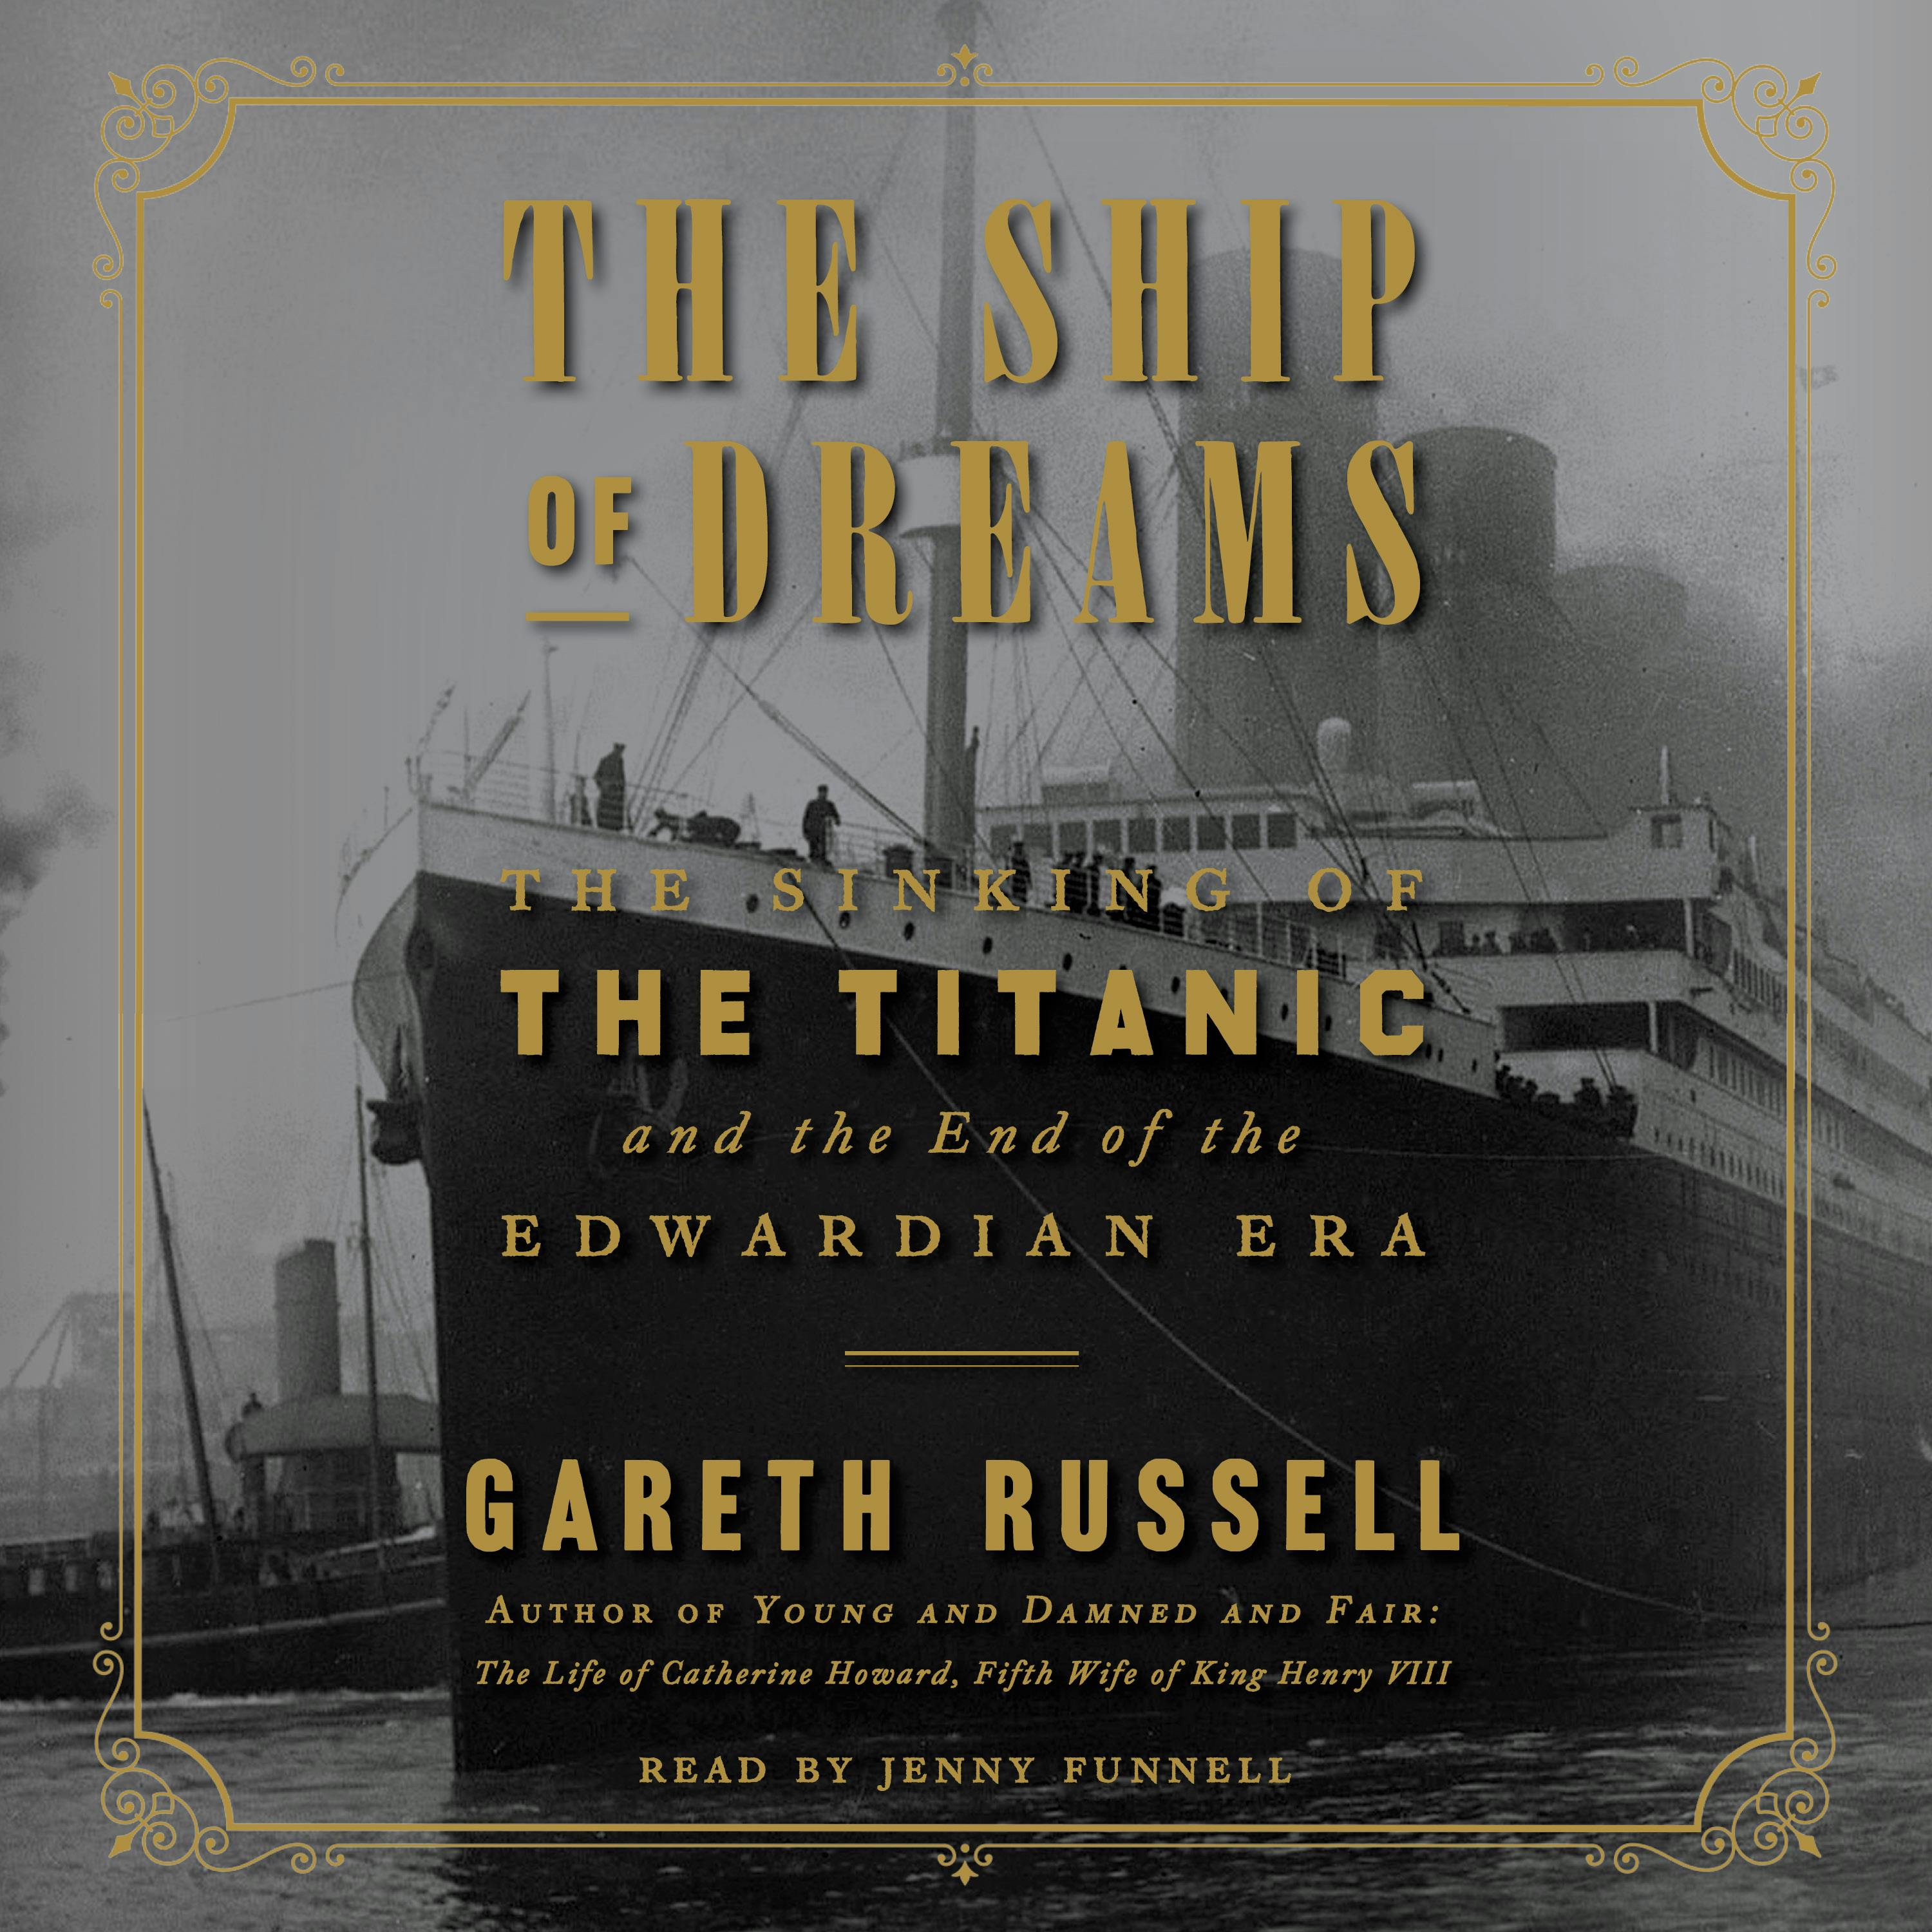 The Ship of Dreams: The Sinking of the Titanic and the End of the Edwardian Era - Gareth Russell